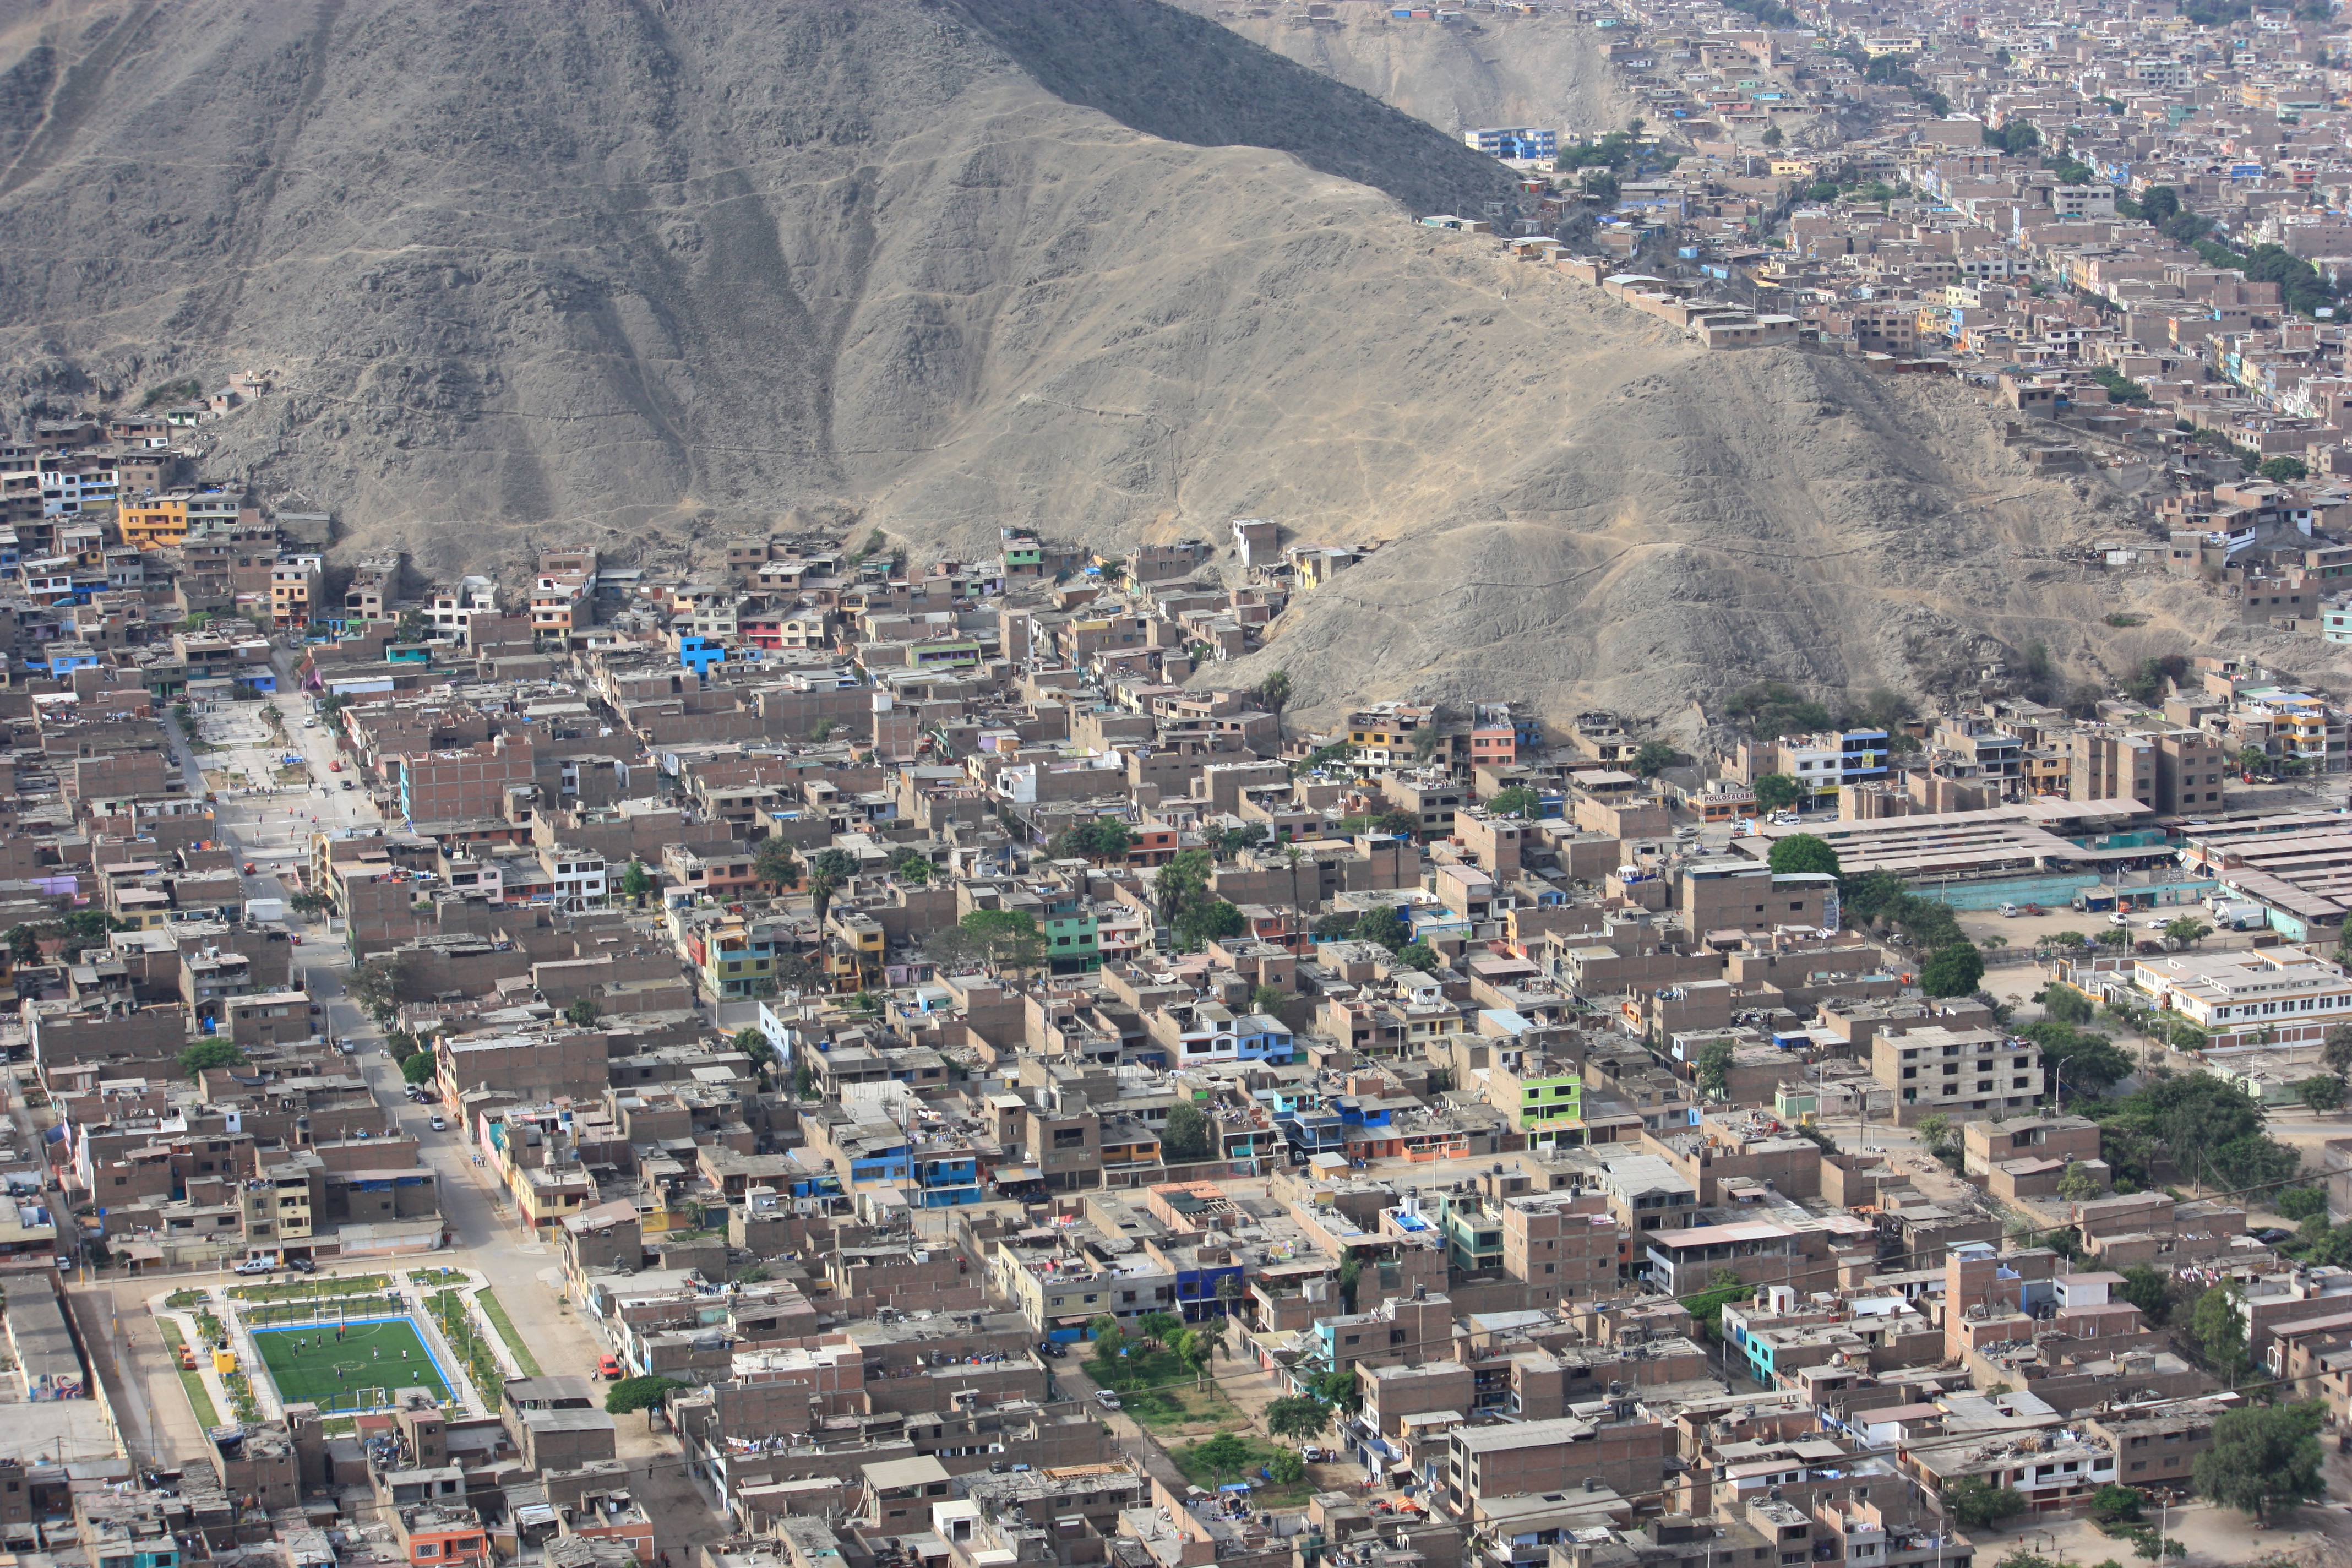 Arial shot of the city of Lima, houses and urbanisation